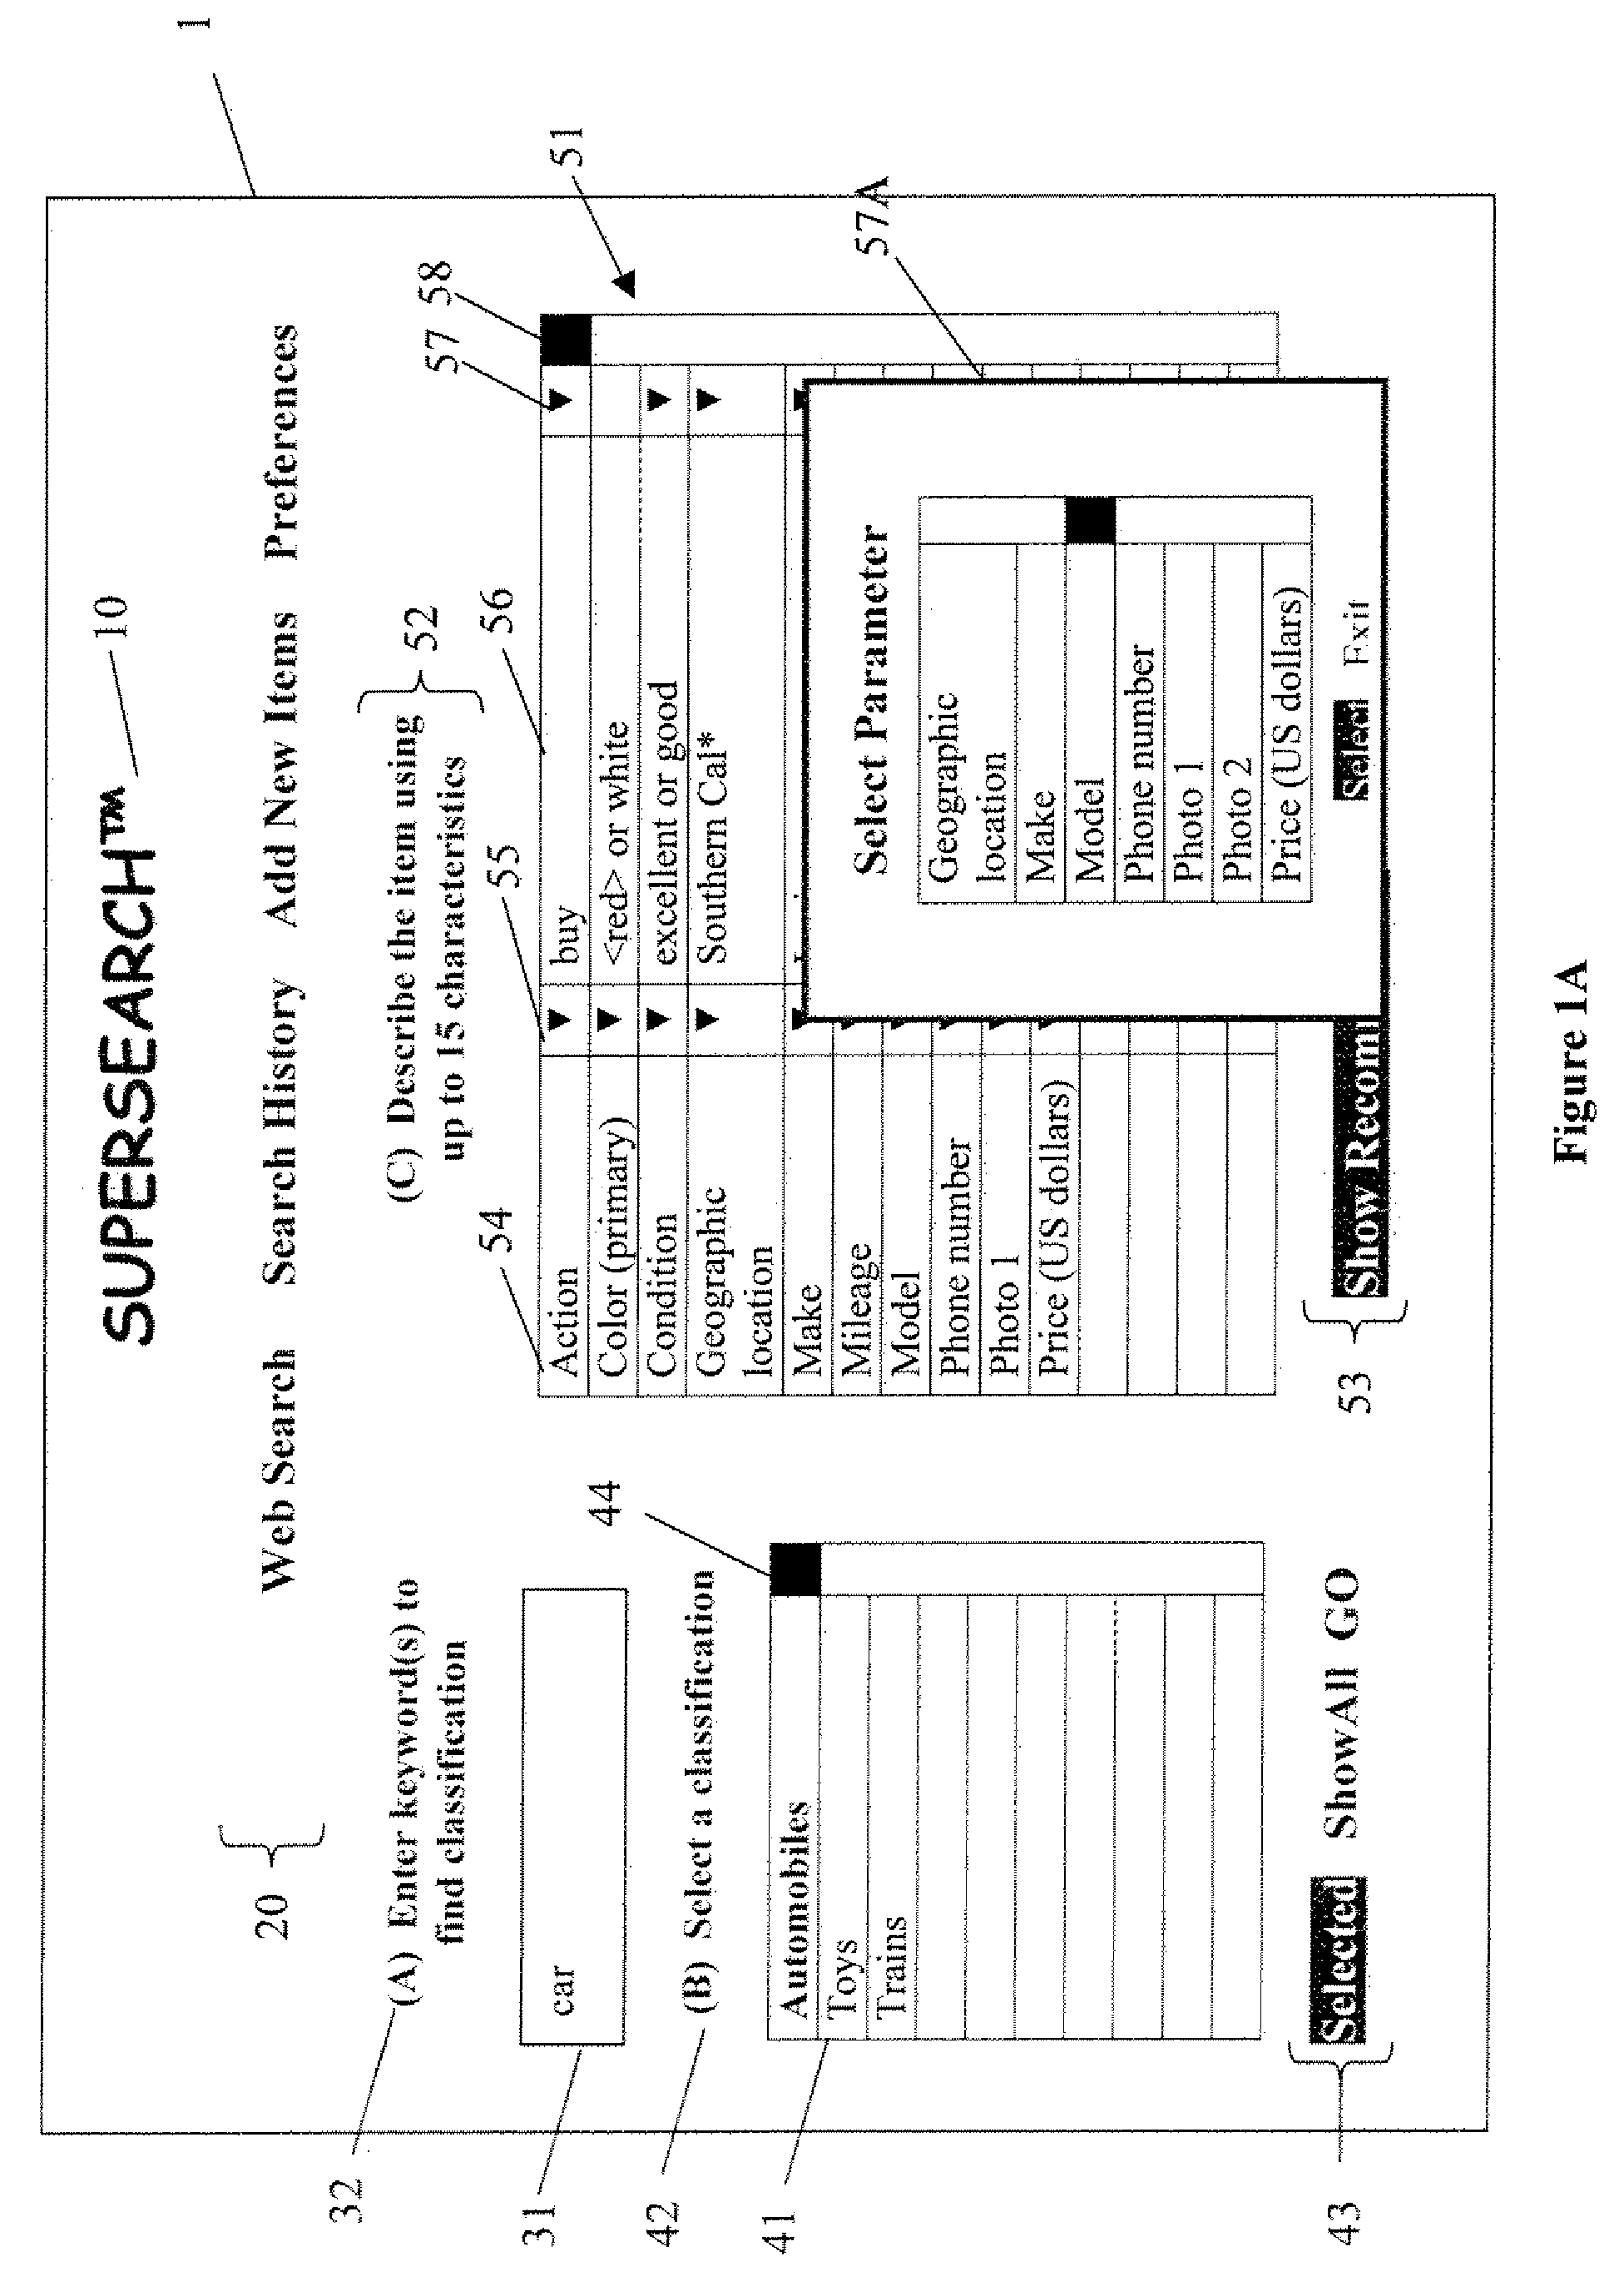 Systems And Methods For Storing And Retrieving Goods And Services Information Using Parameter/Value Databases